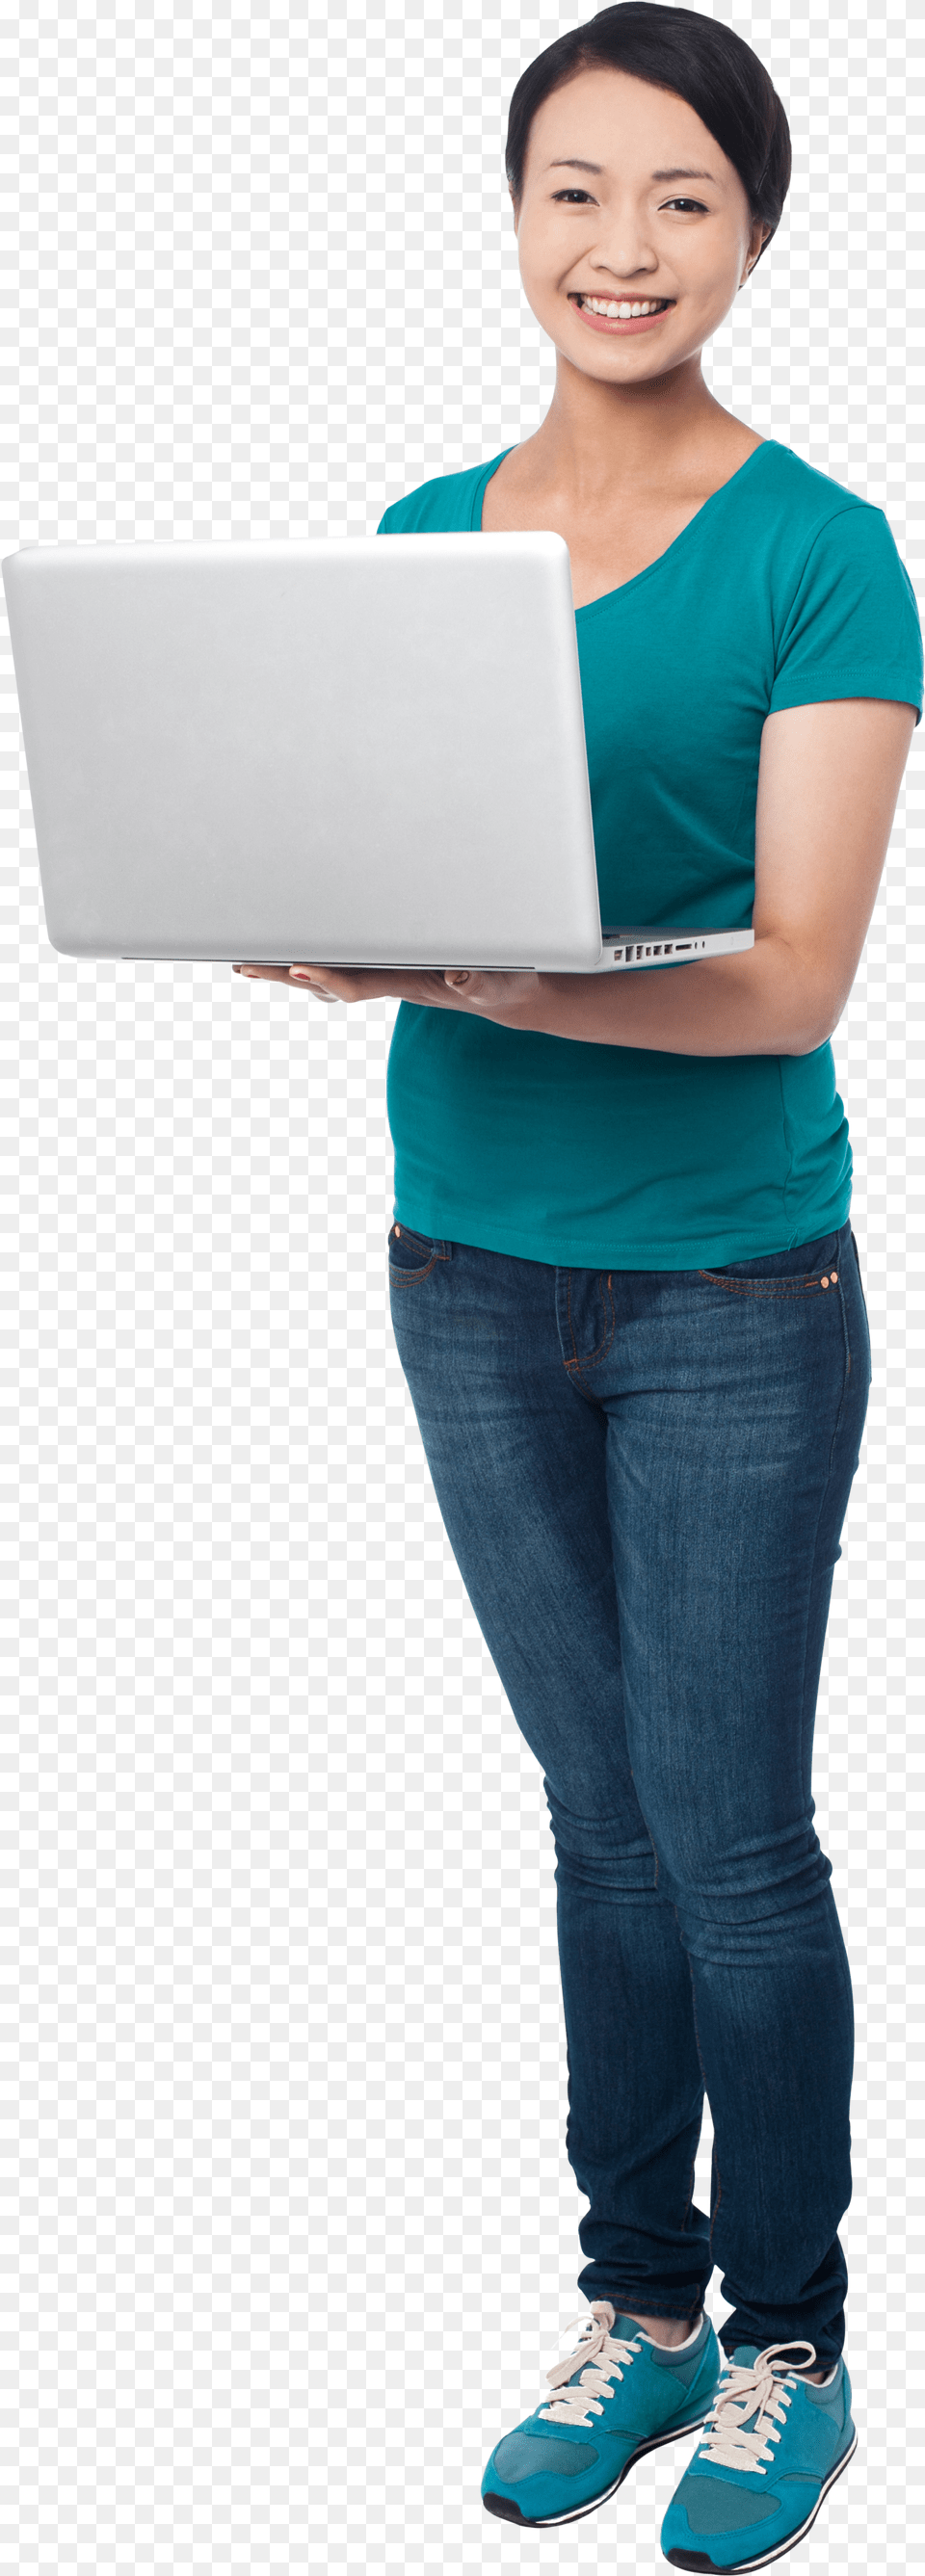 Girl With Laptop Png Image